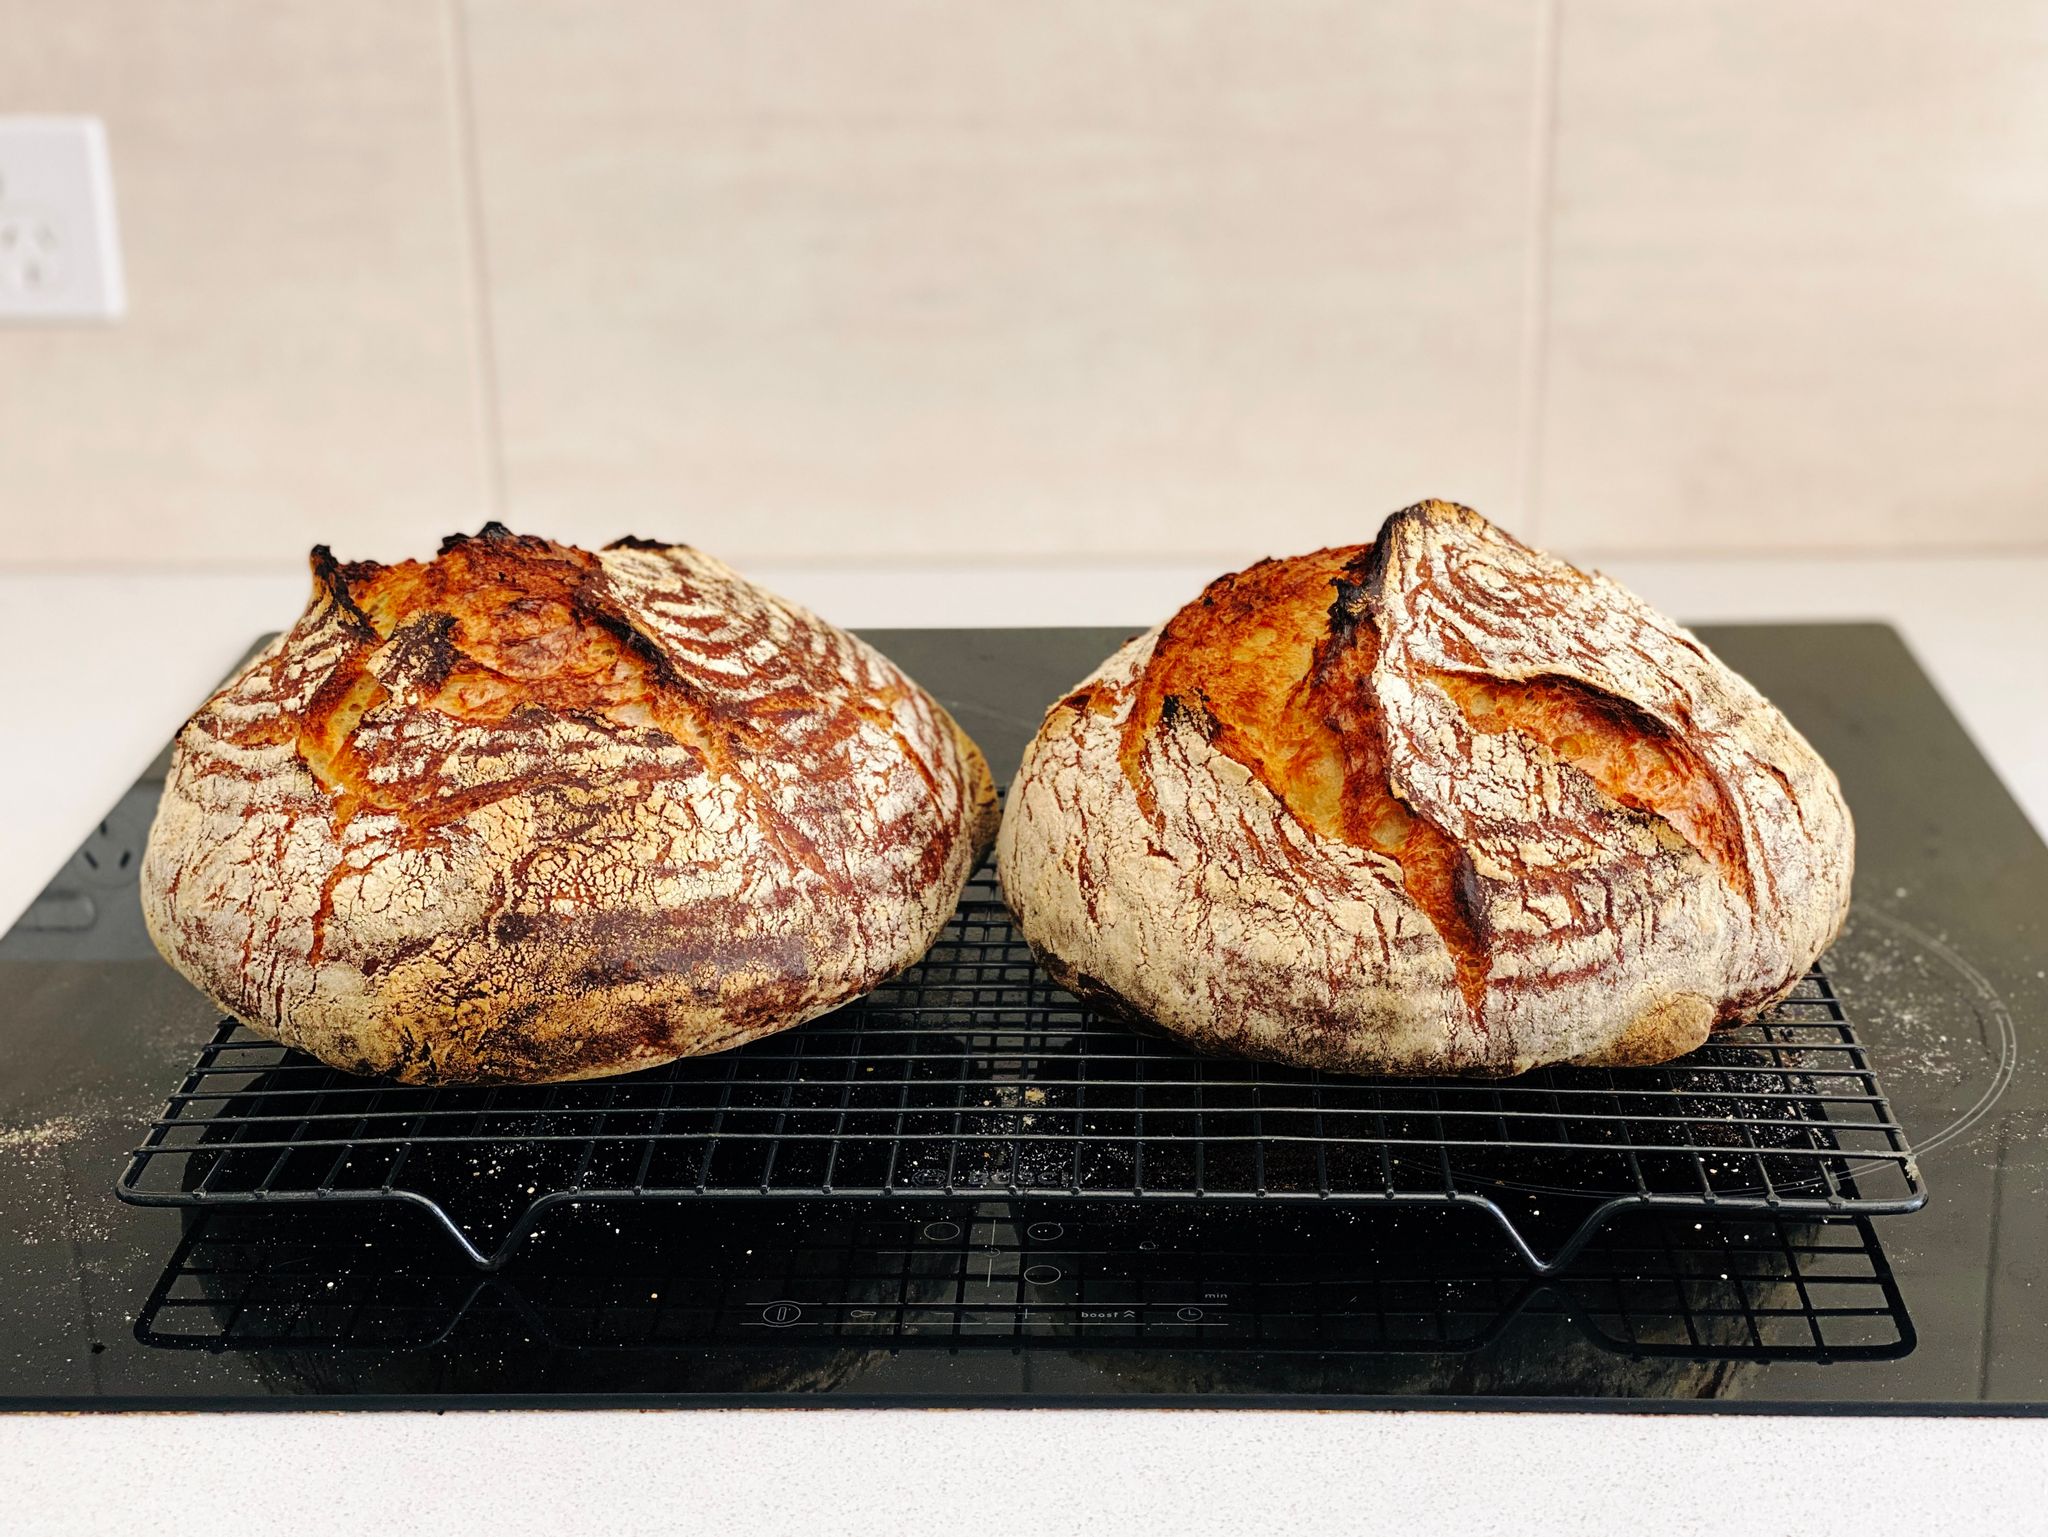 A photo of two golden brown loaves of bread sitting on a cooling rack.